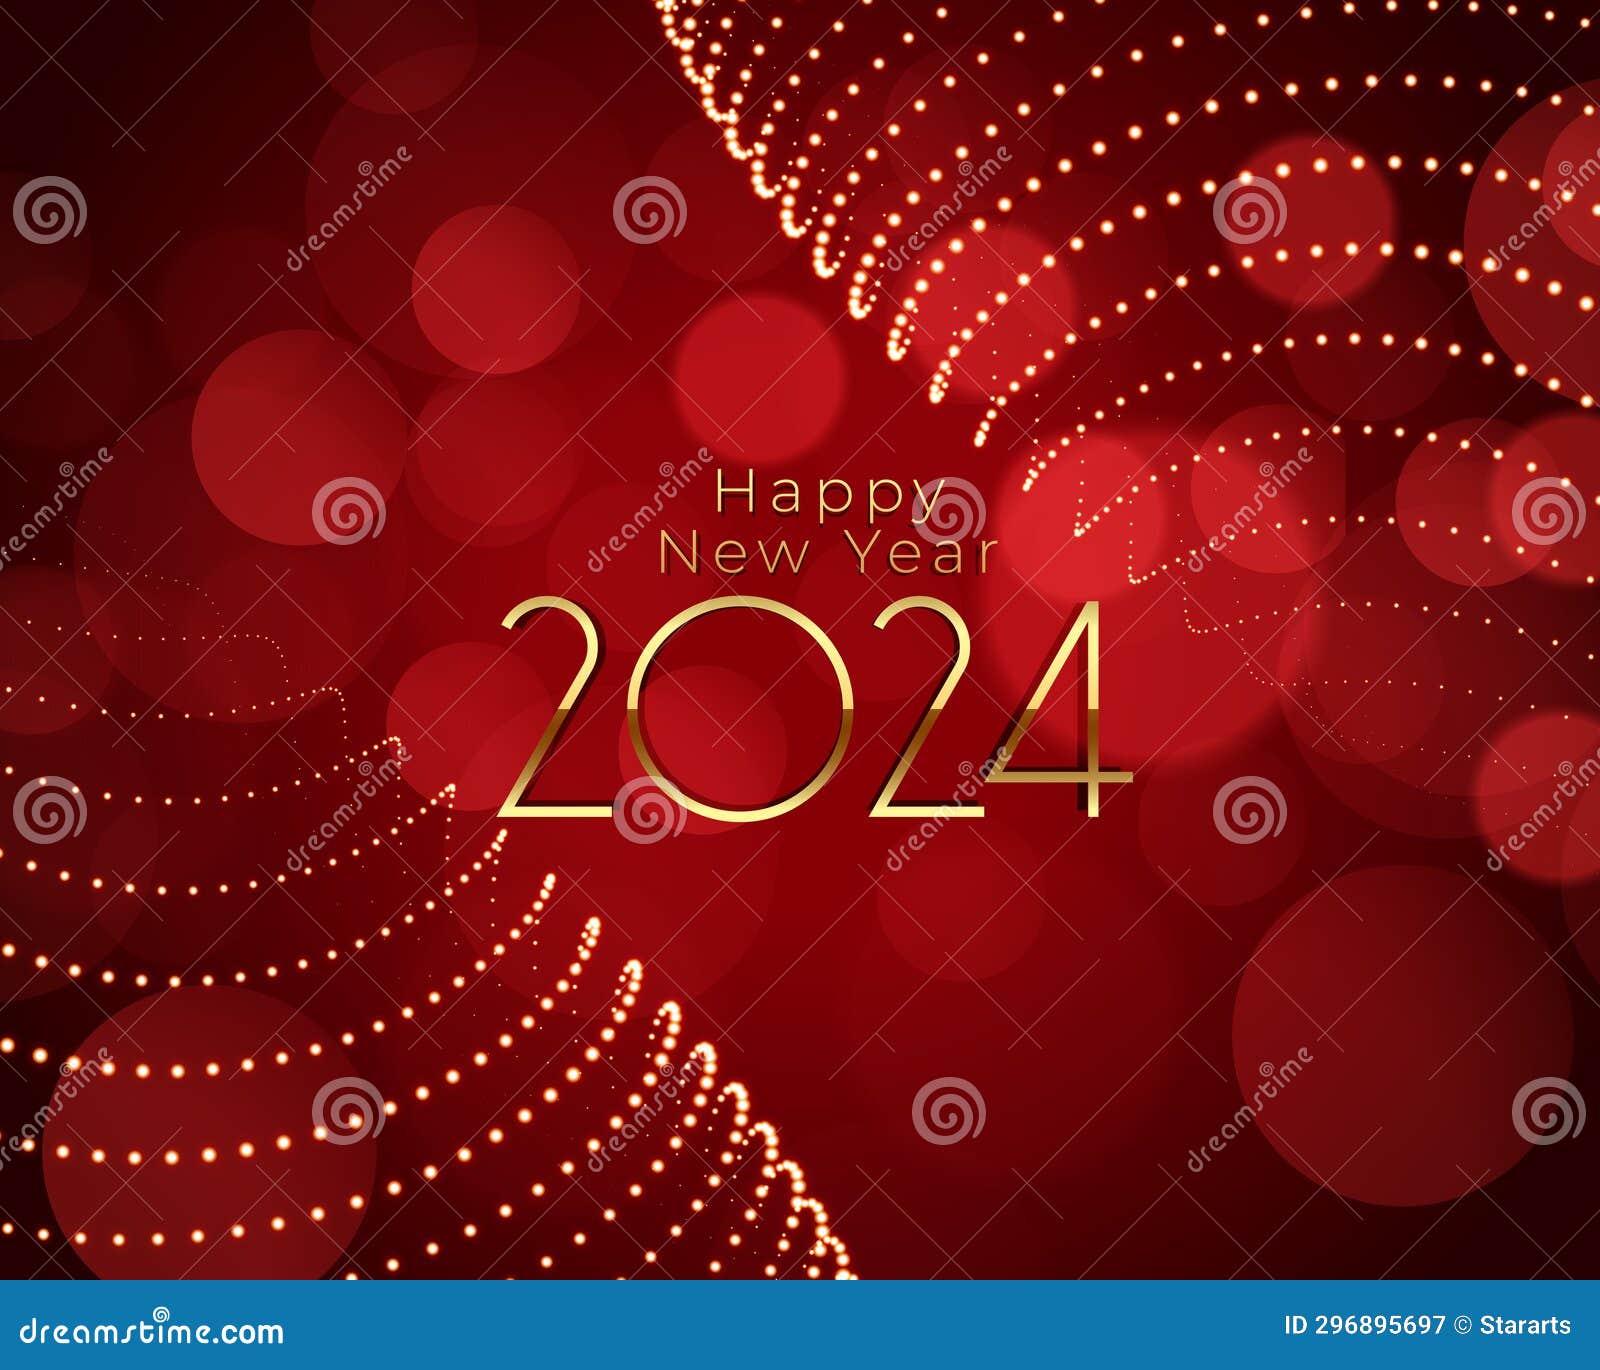 Happy New Year 2024 Occasion Background with Bokeh Effect Stock ...